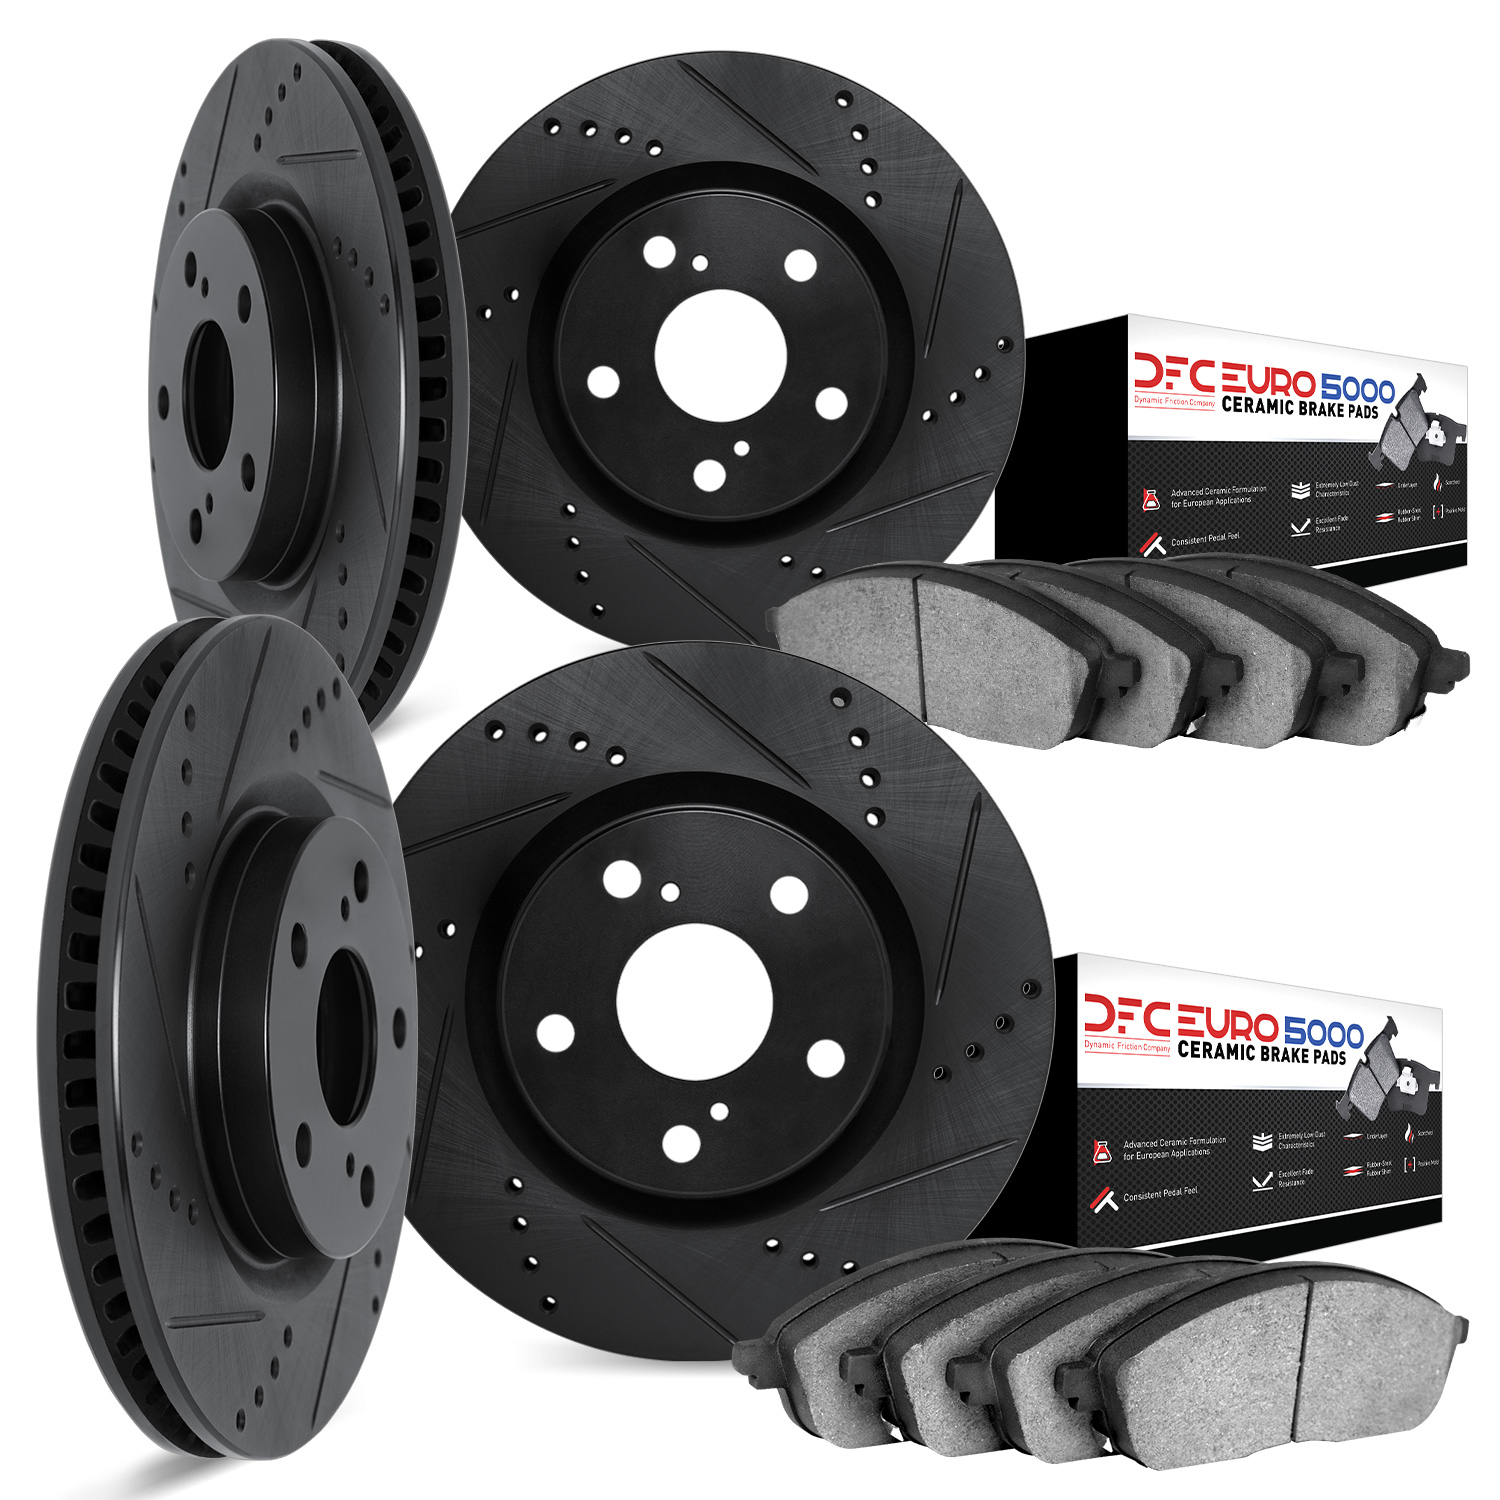 8604-46000 Drilled/Slotted Brake Rotors w/5000 Euro Ceramic Brake Pads Kit [Black], 2005-2008 GM, Position: Front and Rear